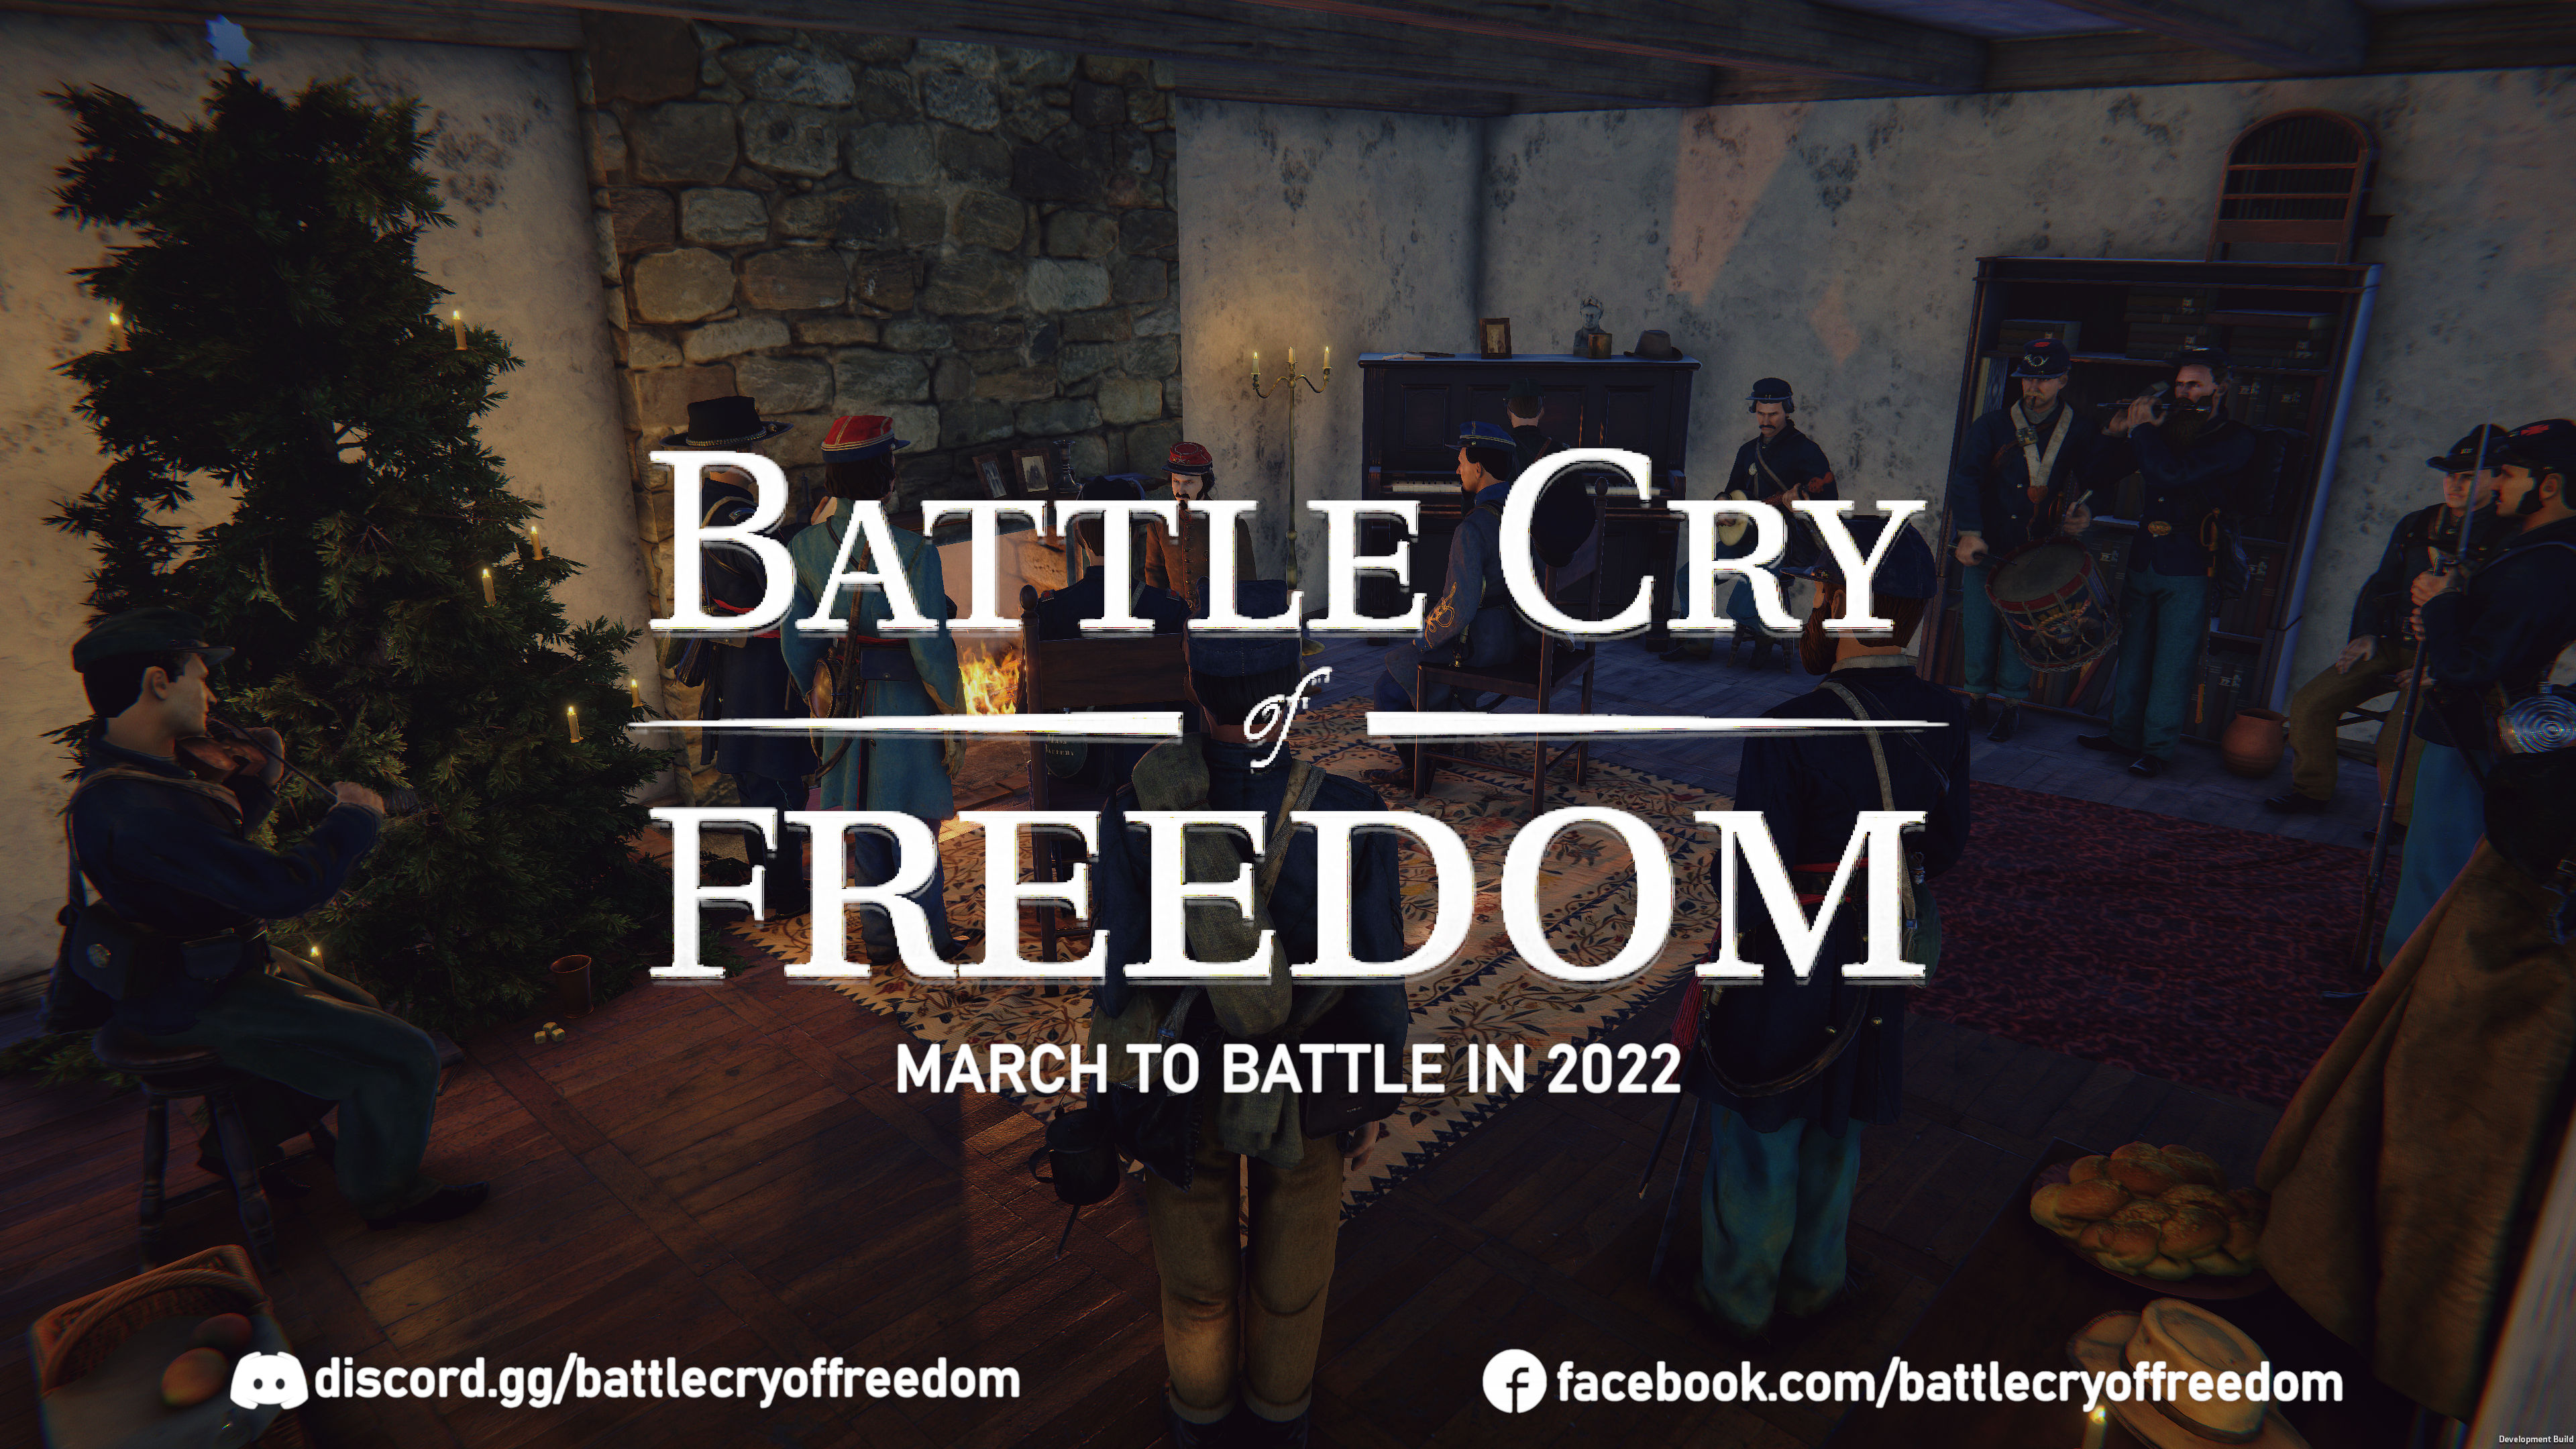 battle cry of freedom civil war song release date